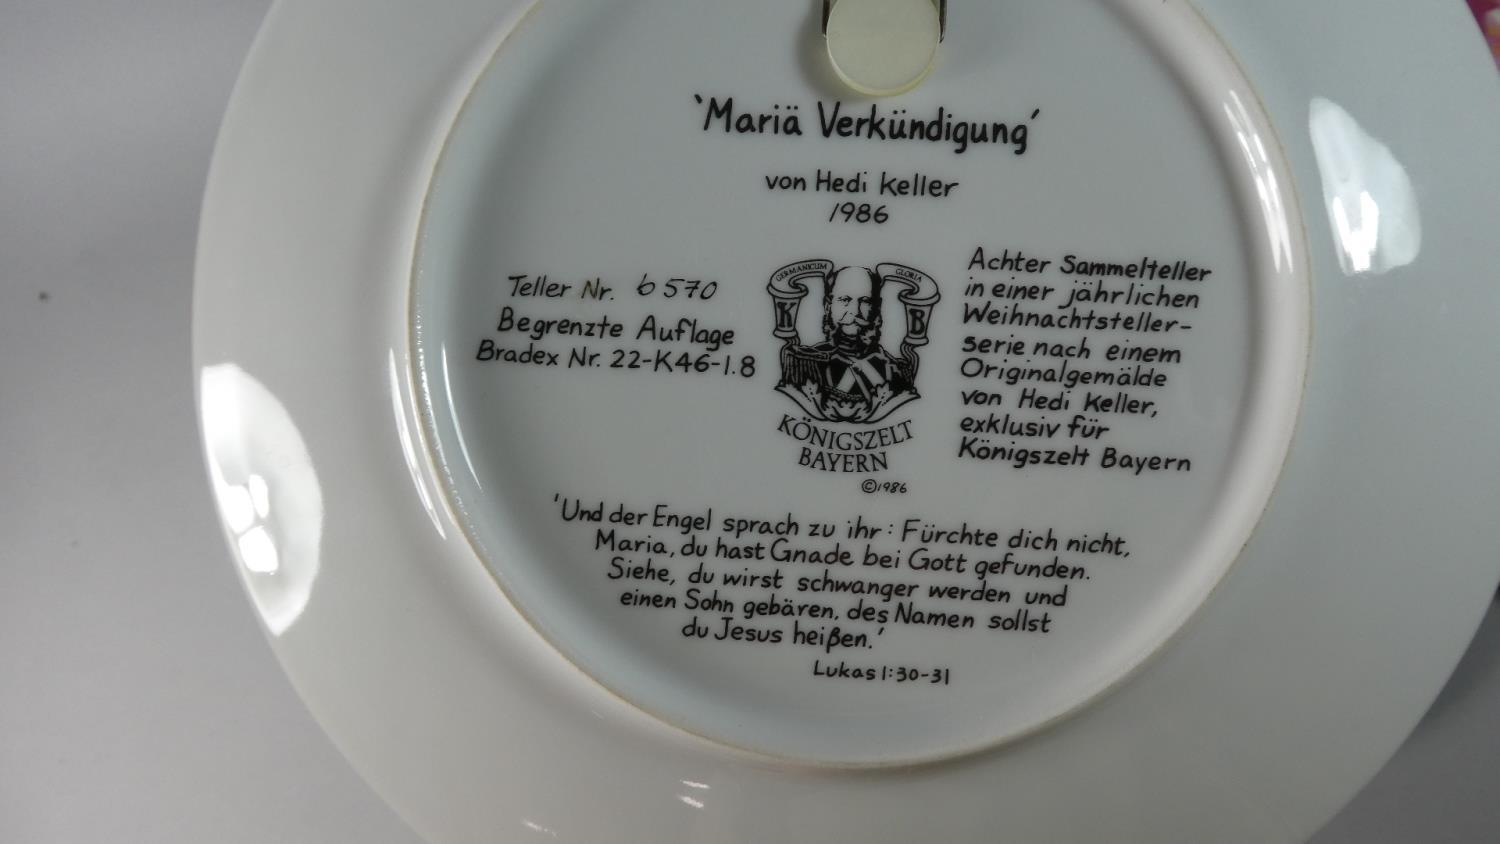 A Collection of Eight German Porcelain Christmas Plates 'The Hedi Keller Collection', with - Image 2 of 4